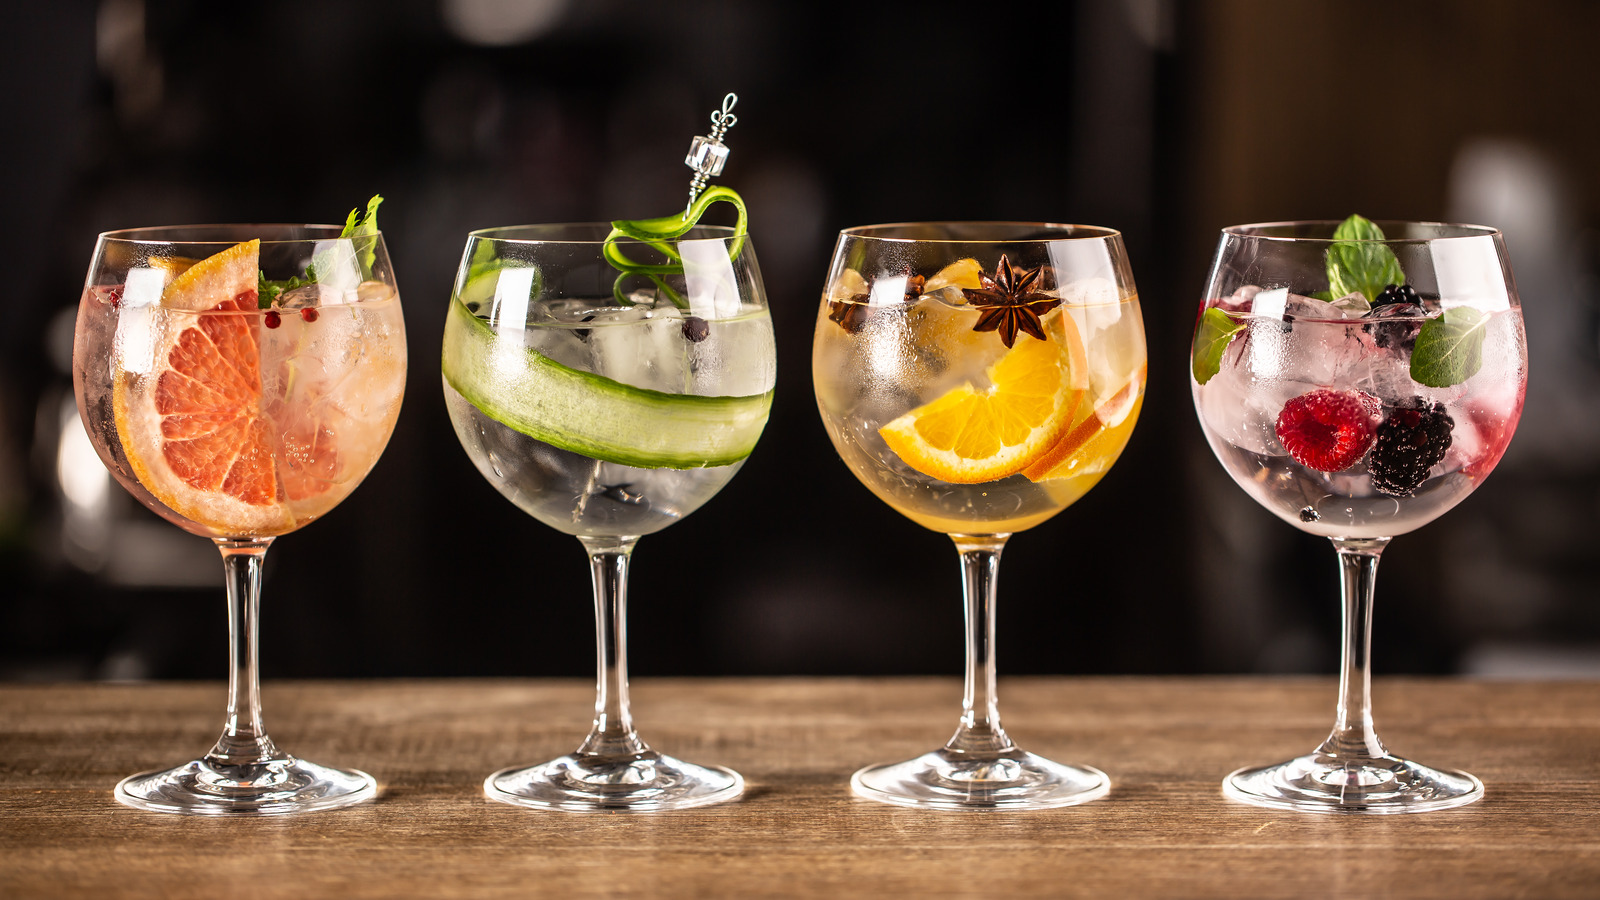 23 Cocktails To Try If You Like Drinking Gin